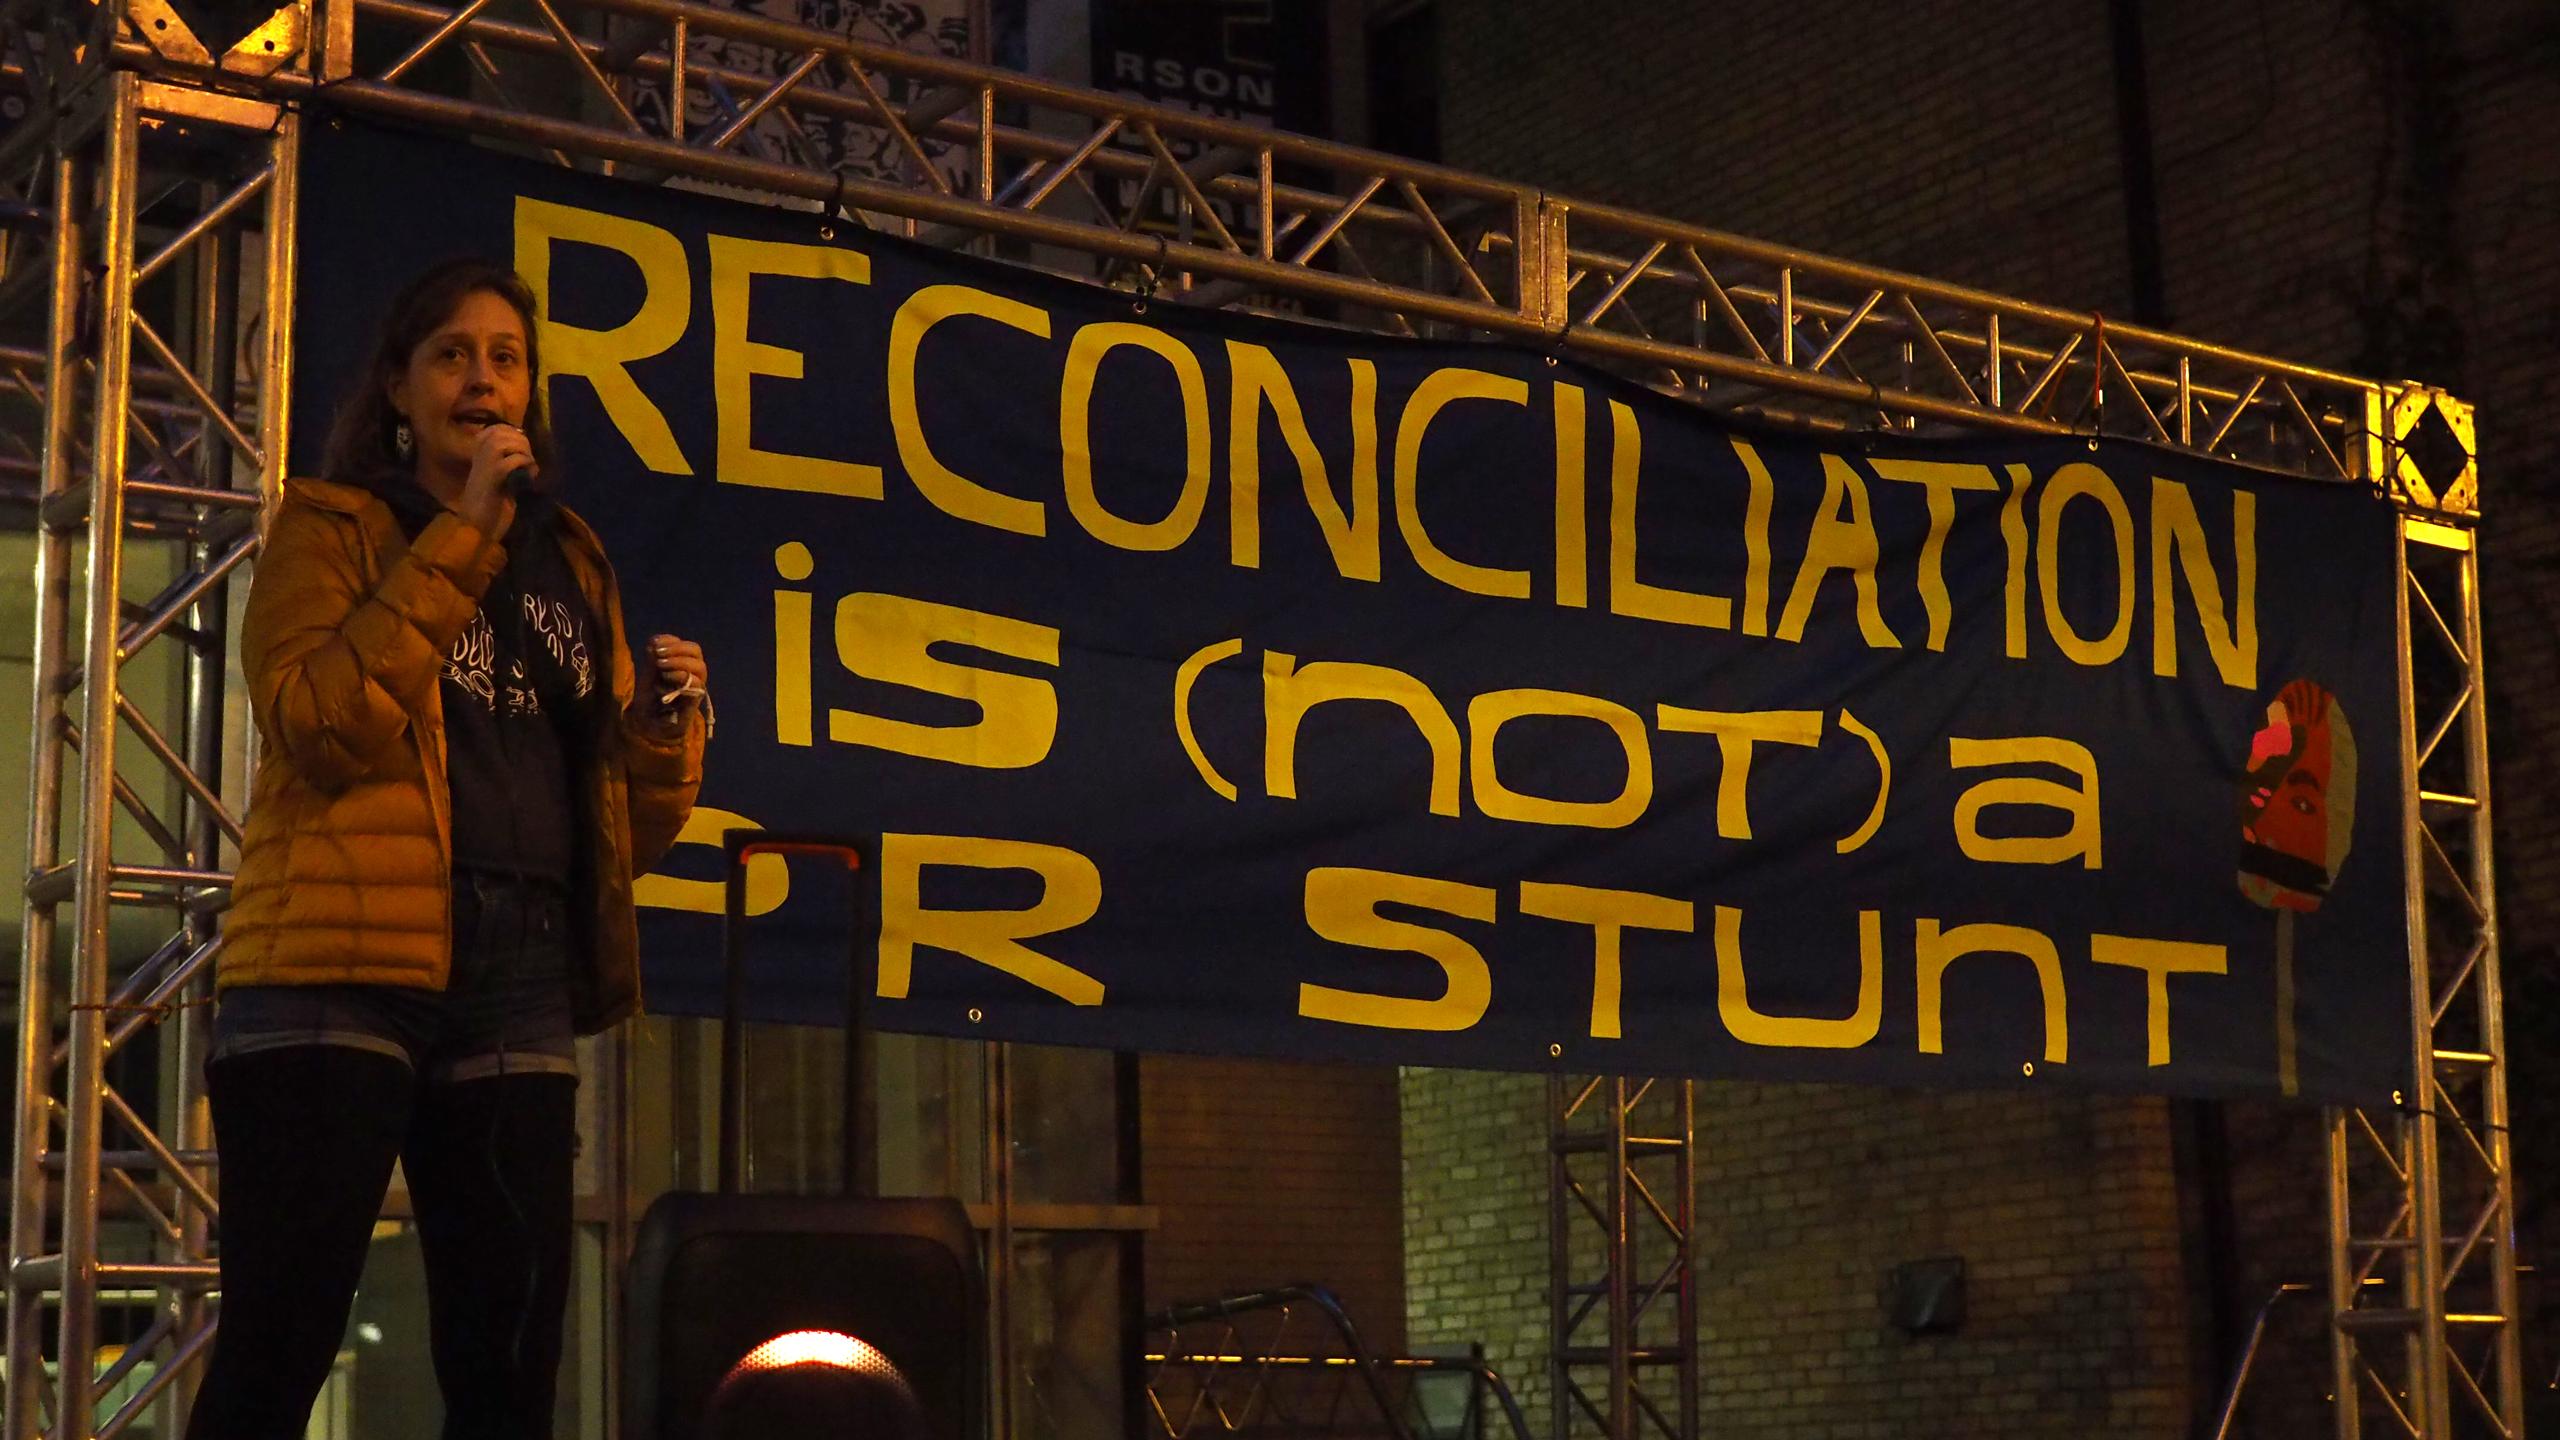 Miranda Black speaks at a rally calling for more Indigenous representation on Ryerson University's renaming advisory committee on Oct. 6, 2021. A large banner behind black reads: "Reconciliation is (not) a PR stunt."